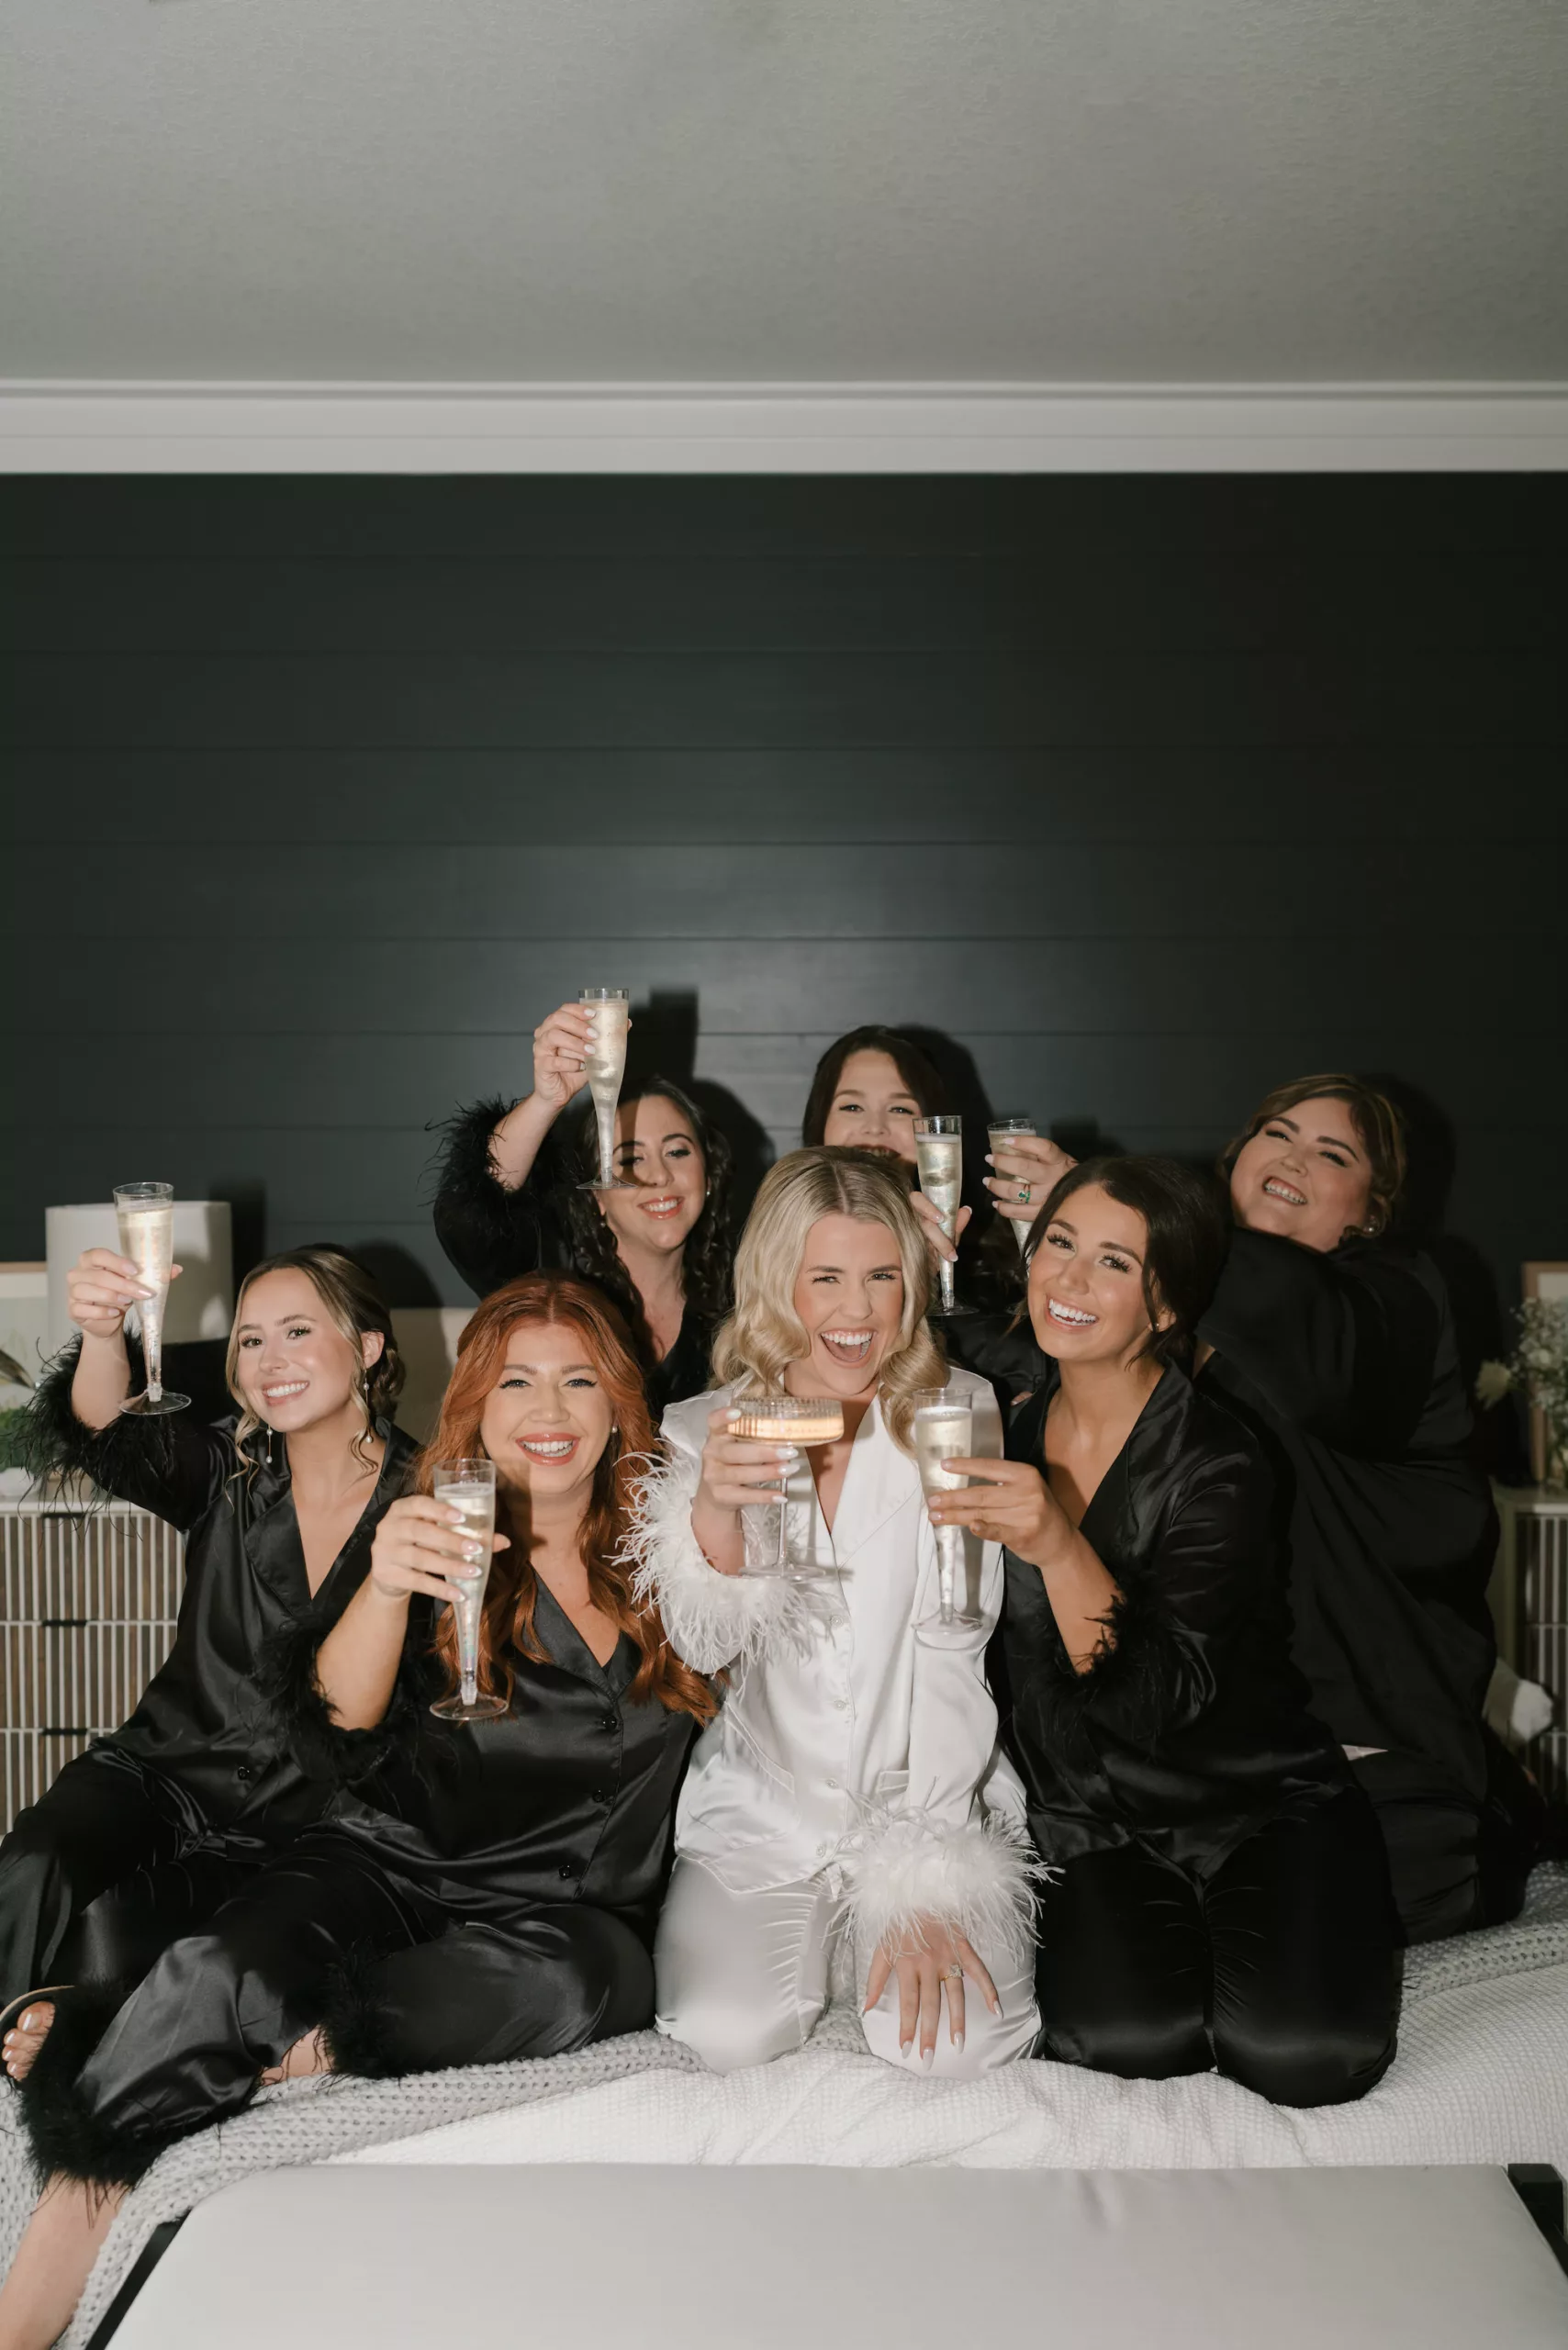 Bride and Bridesmaids Getting Ready Wedding Day Champagne Celebration